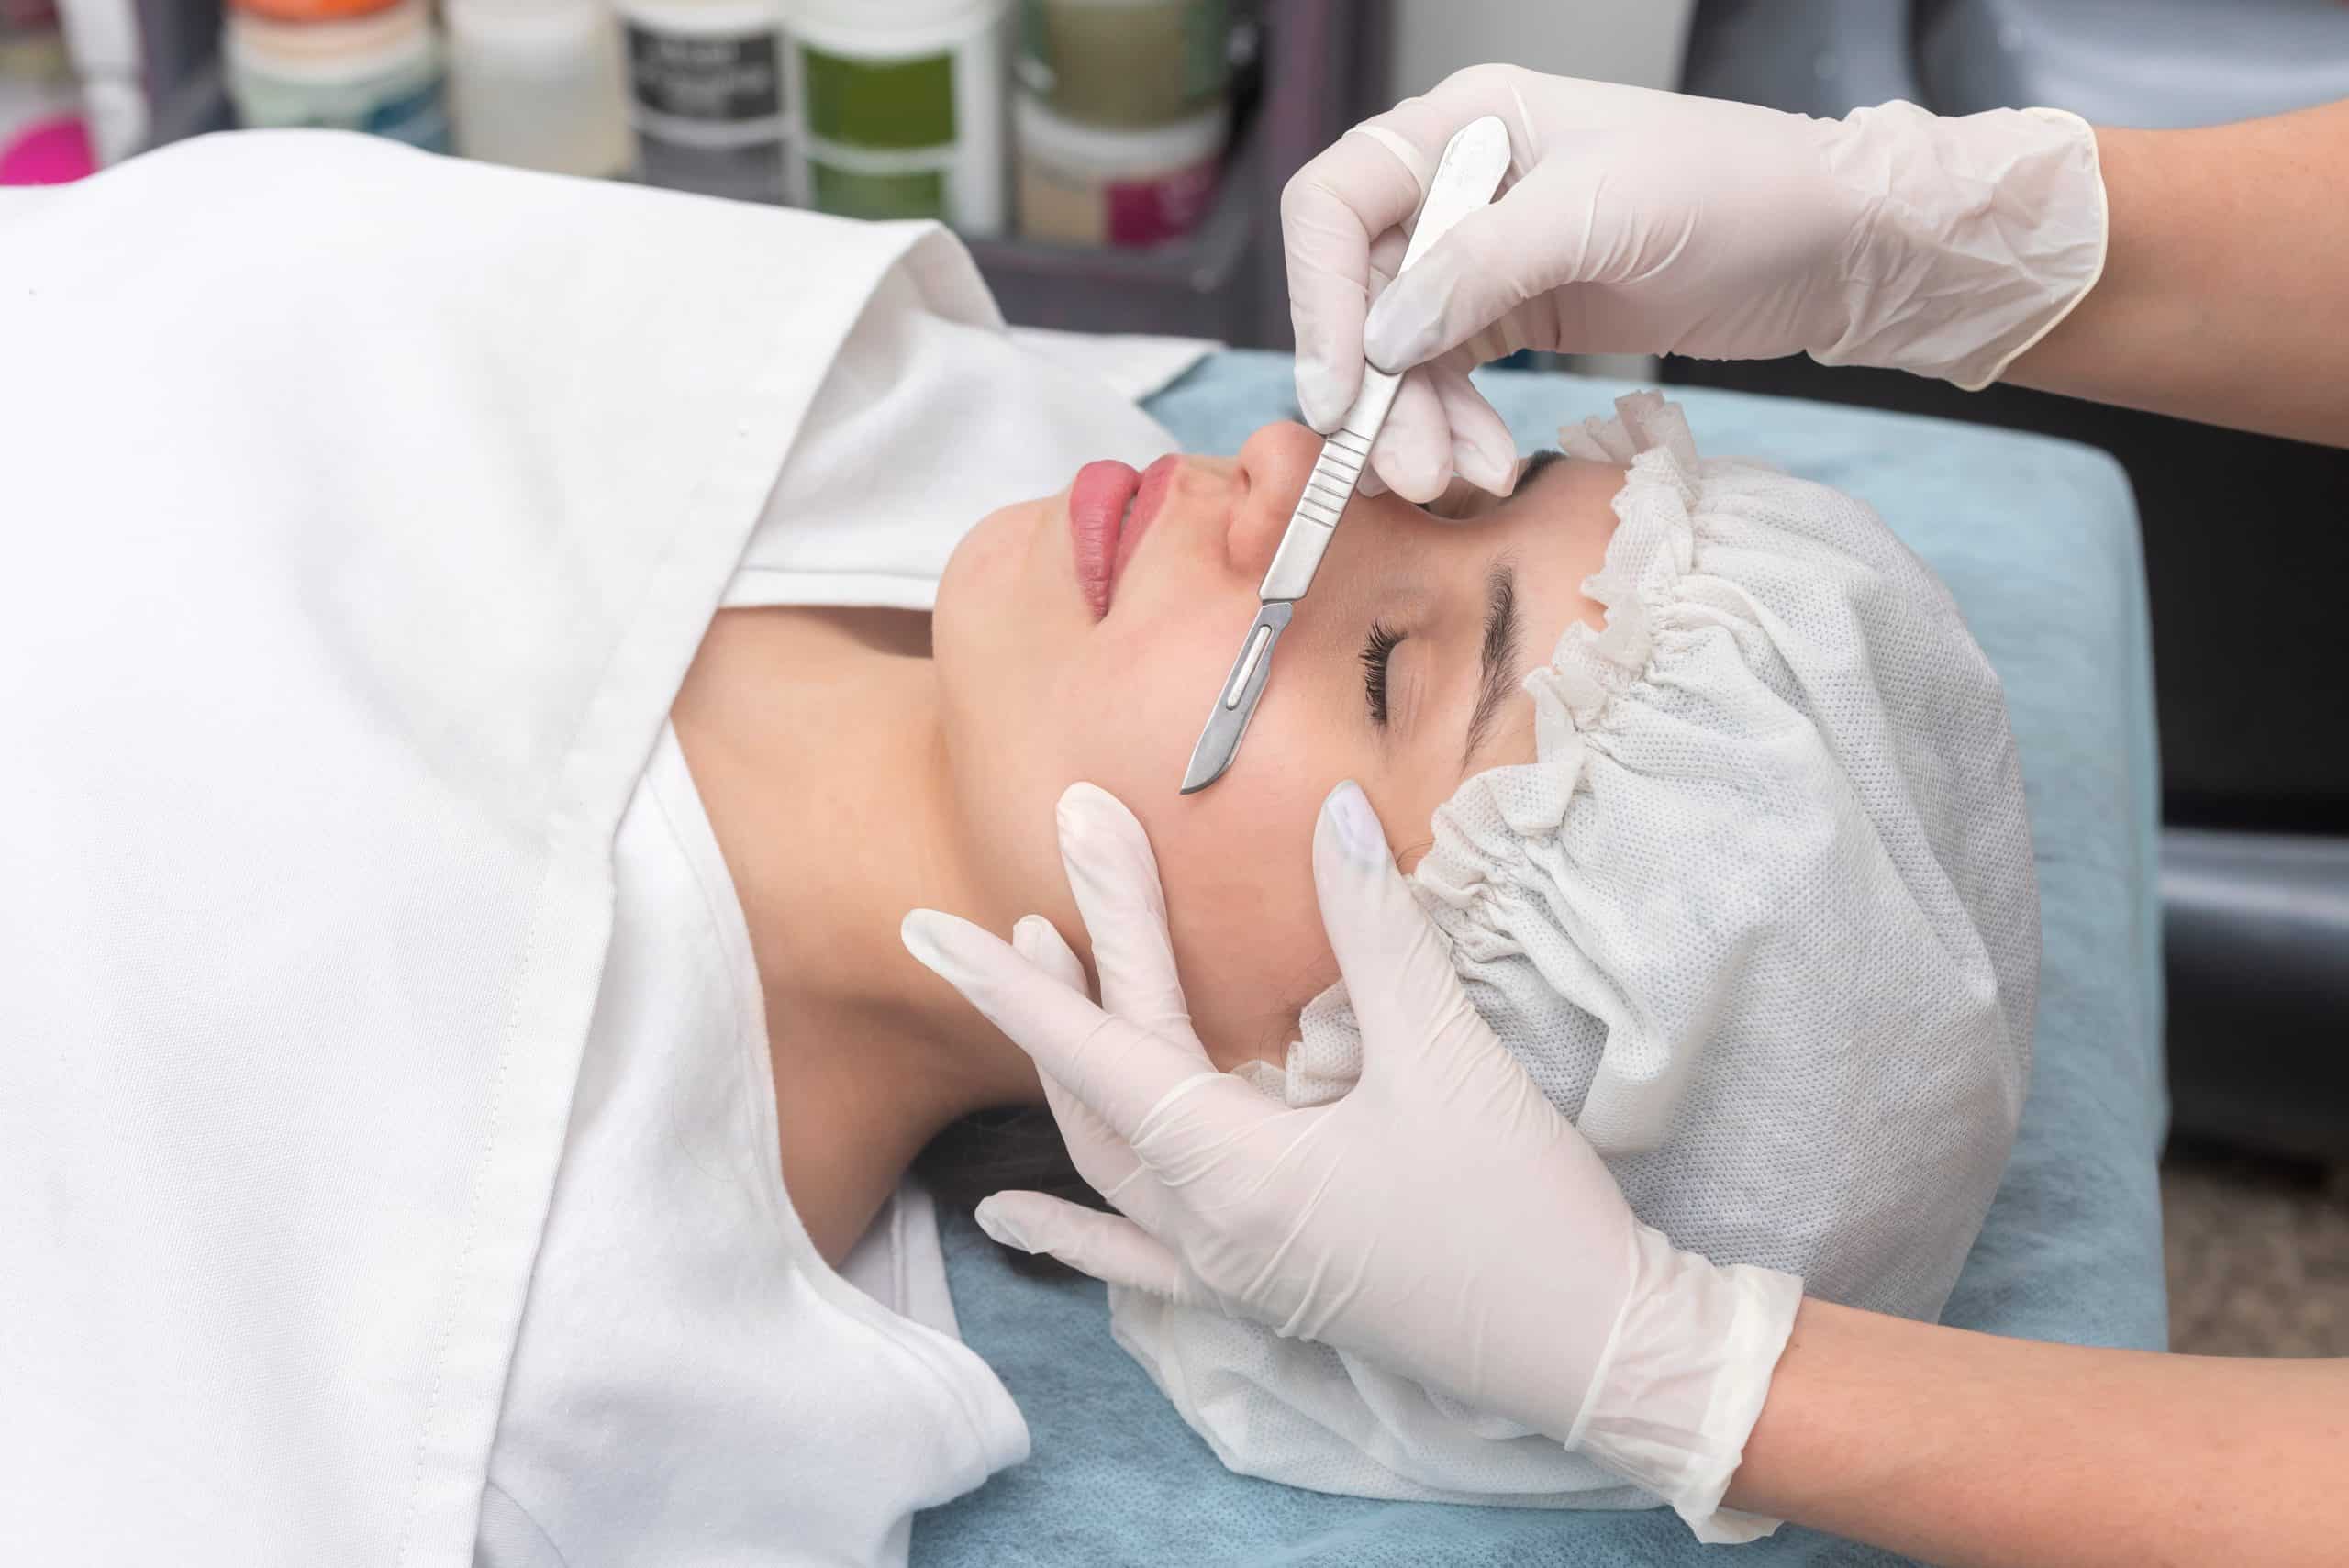 Dermaplaning vs Other Facial Treatments Comparing Techniques and Results